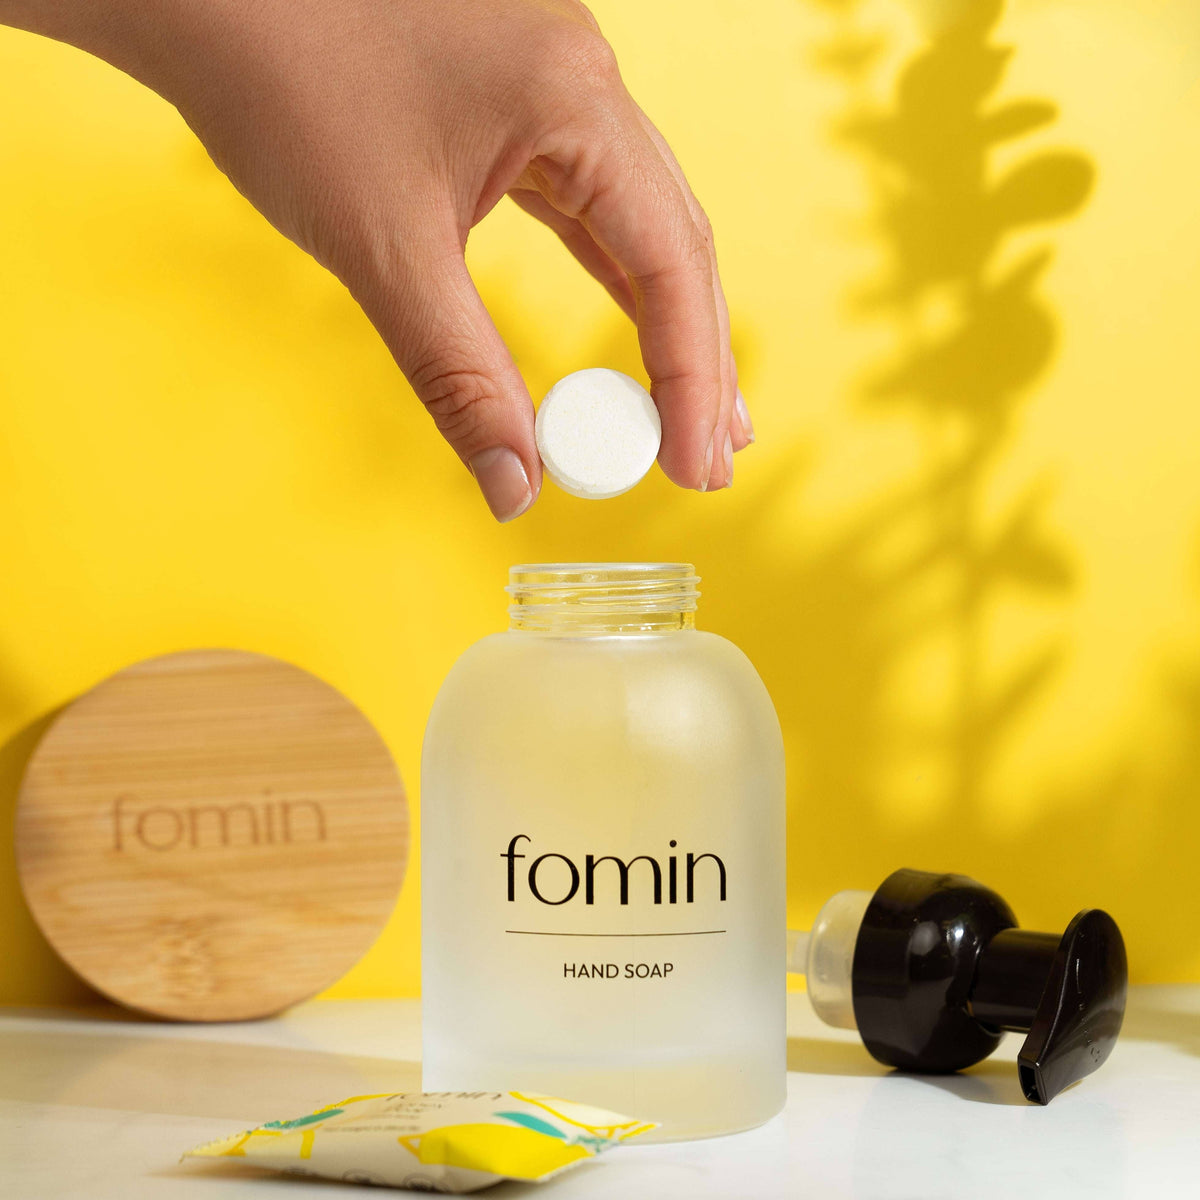 Fomin - Hand Soap Refills: 6 pack / Variety Pack